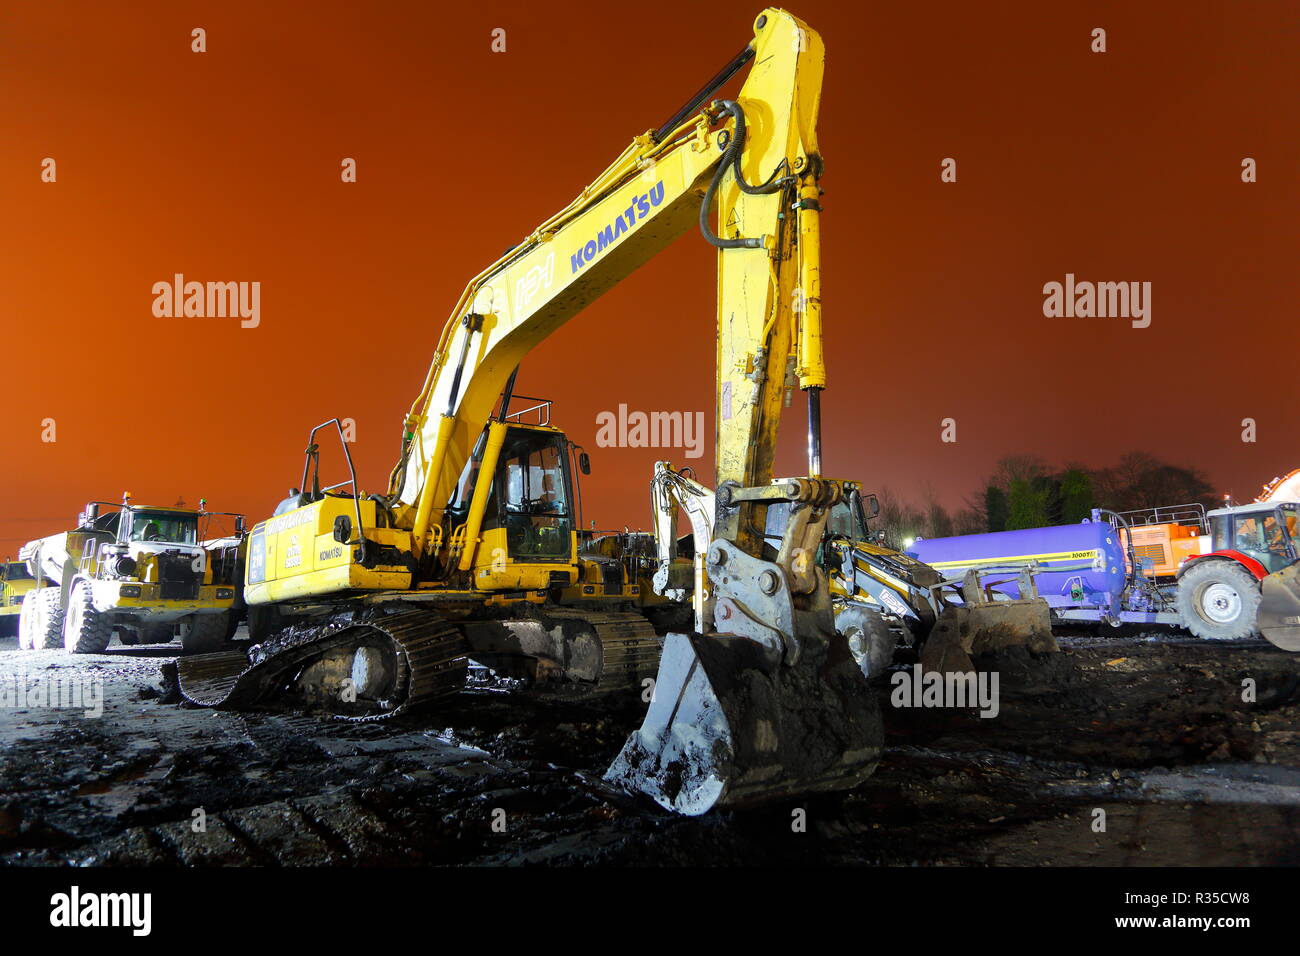 A Komatsu backhoe with a broken track sits idle on the old Recycoal Coal Recycling Plant in Rossington,Doncaster which has now been demolished. Stock Photo